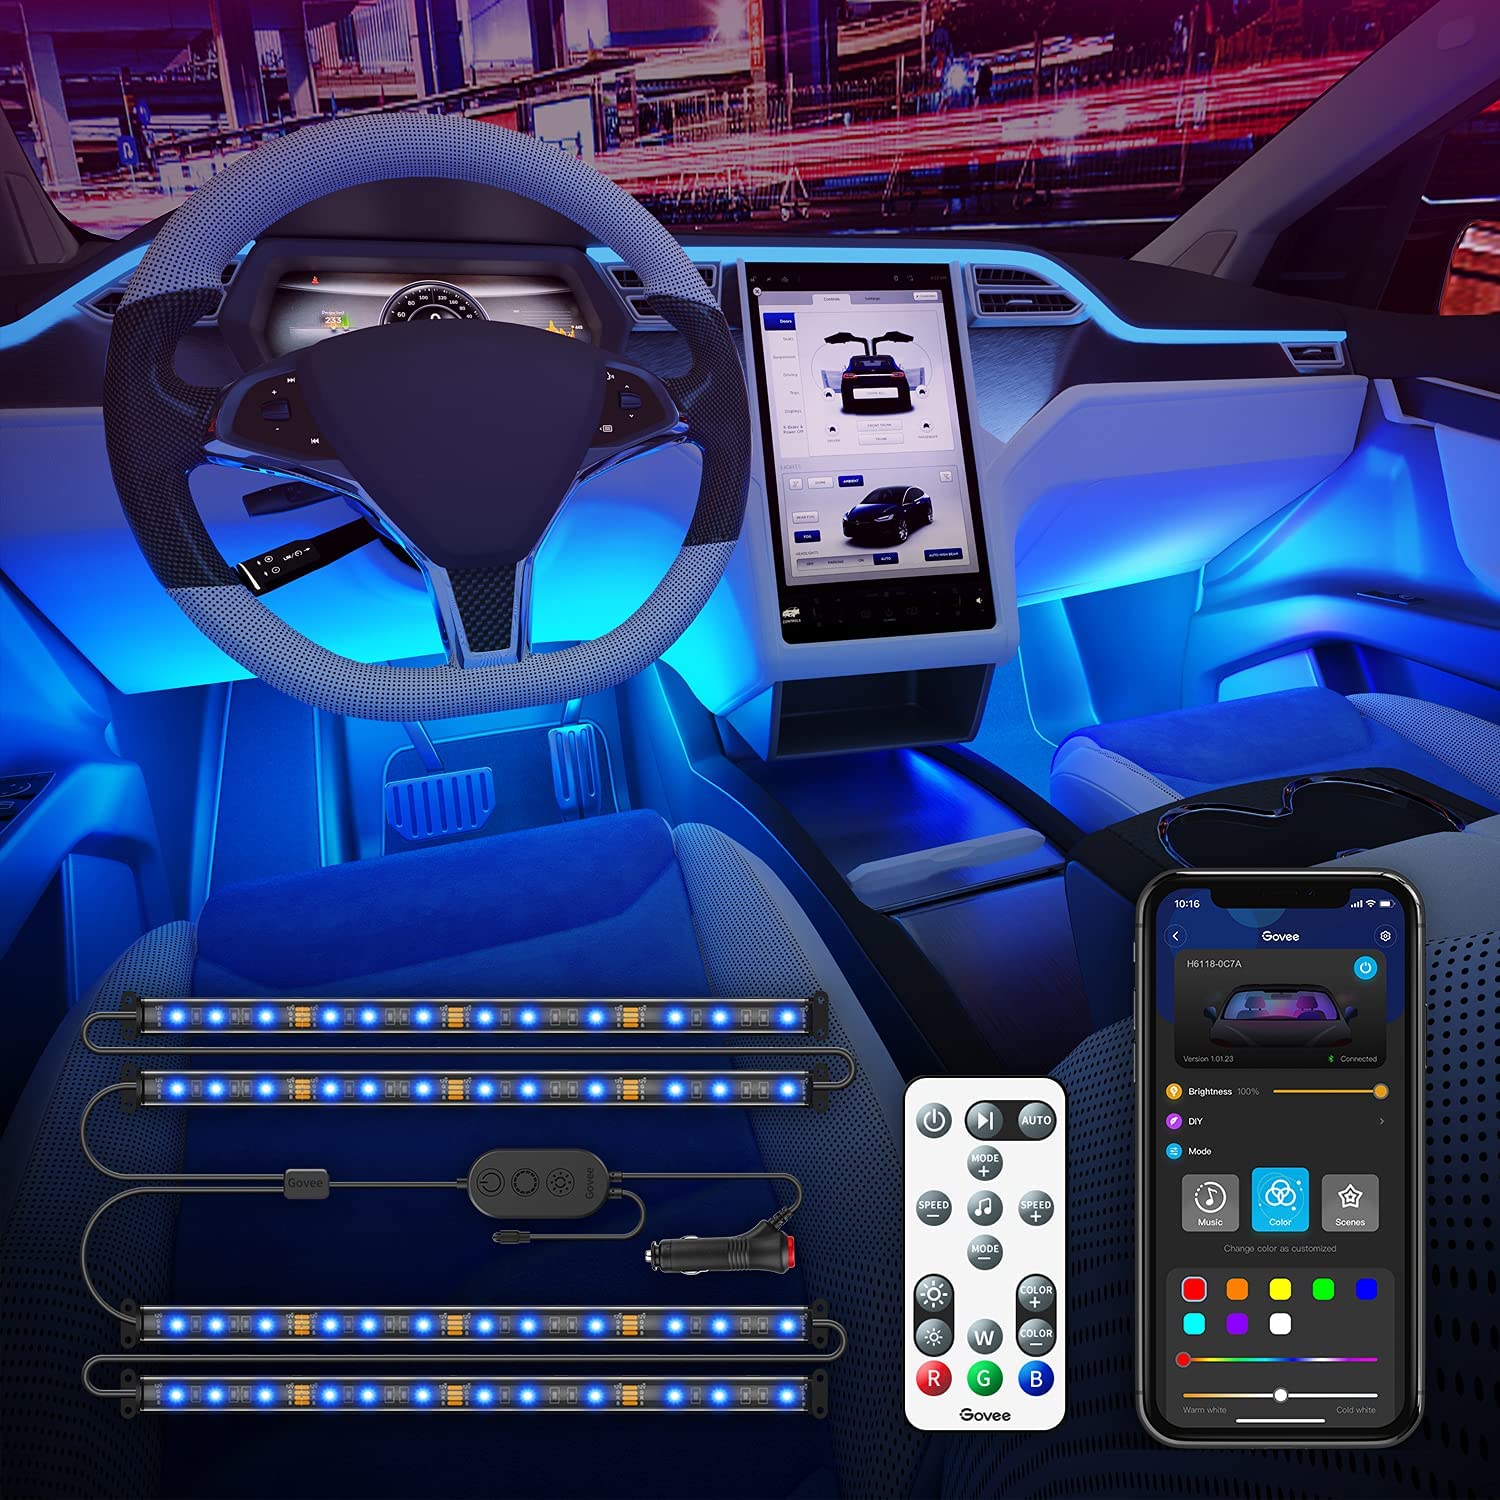 Govee Light Products: Interior RGB LED Under Dash Car Lights (DC 12V) $13.60 & More + Free Shipping